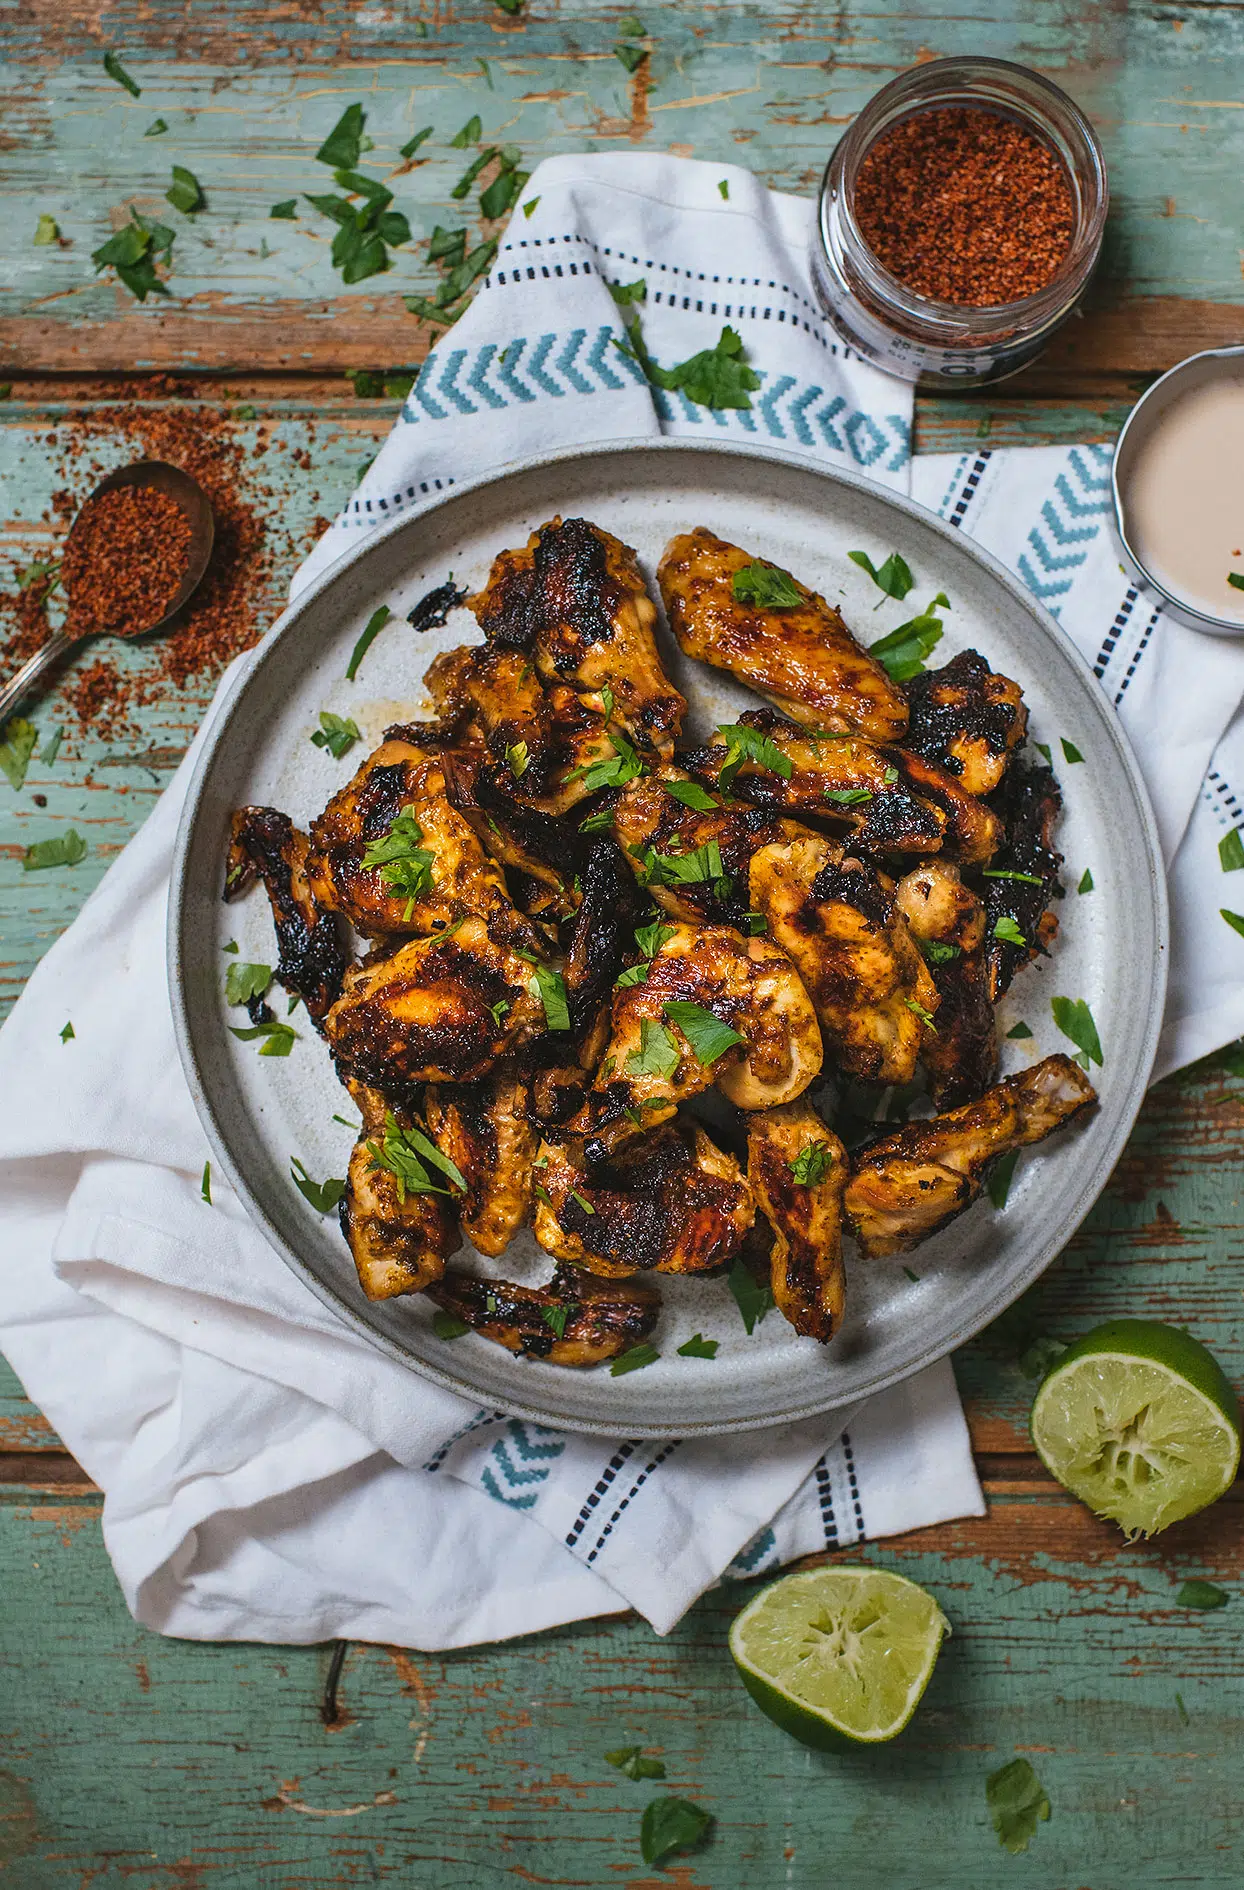 Chili lime chicken wings